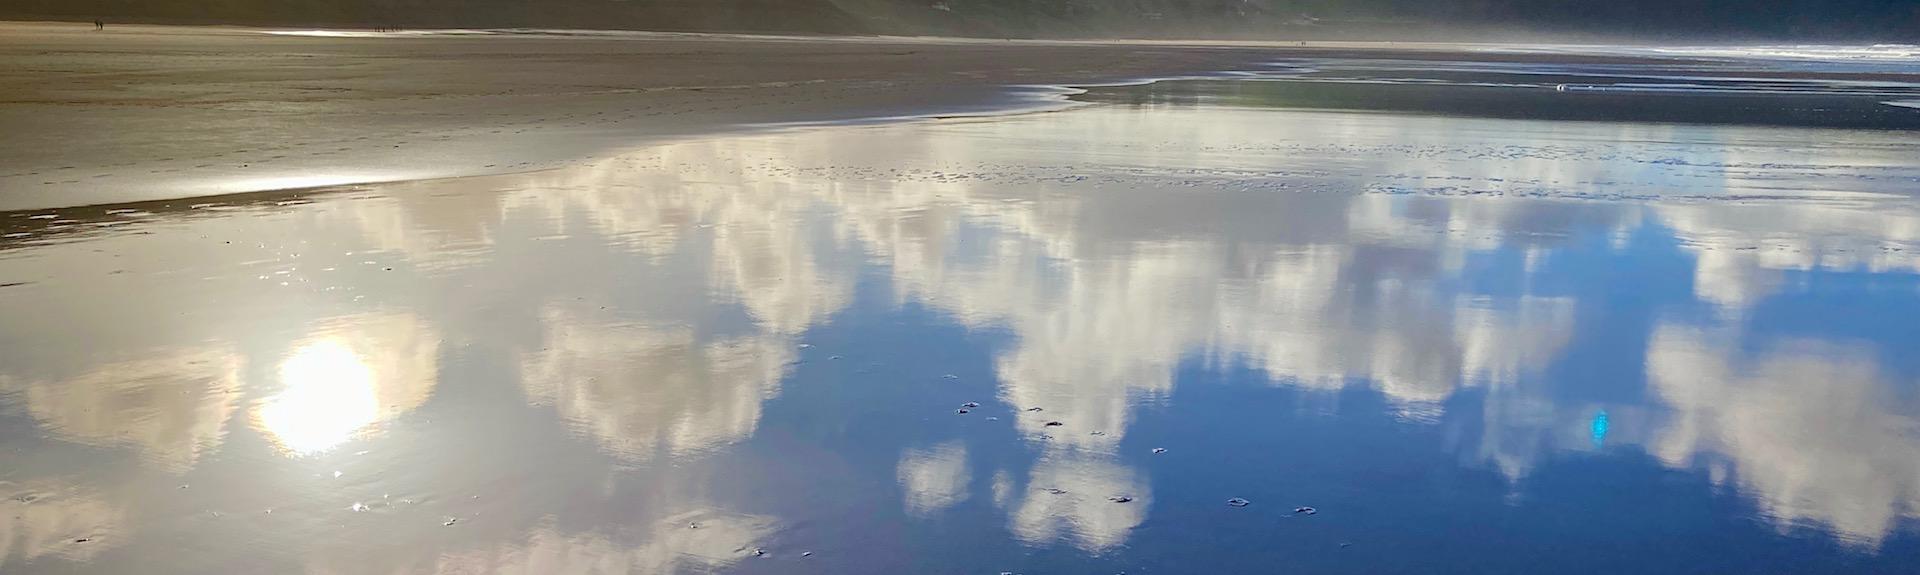 A mirror reflection of blue sky and clouds in the wet sand on Woolacombebeach